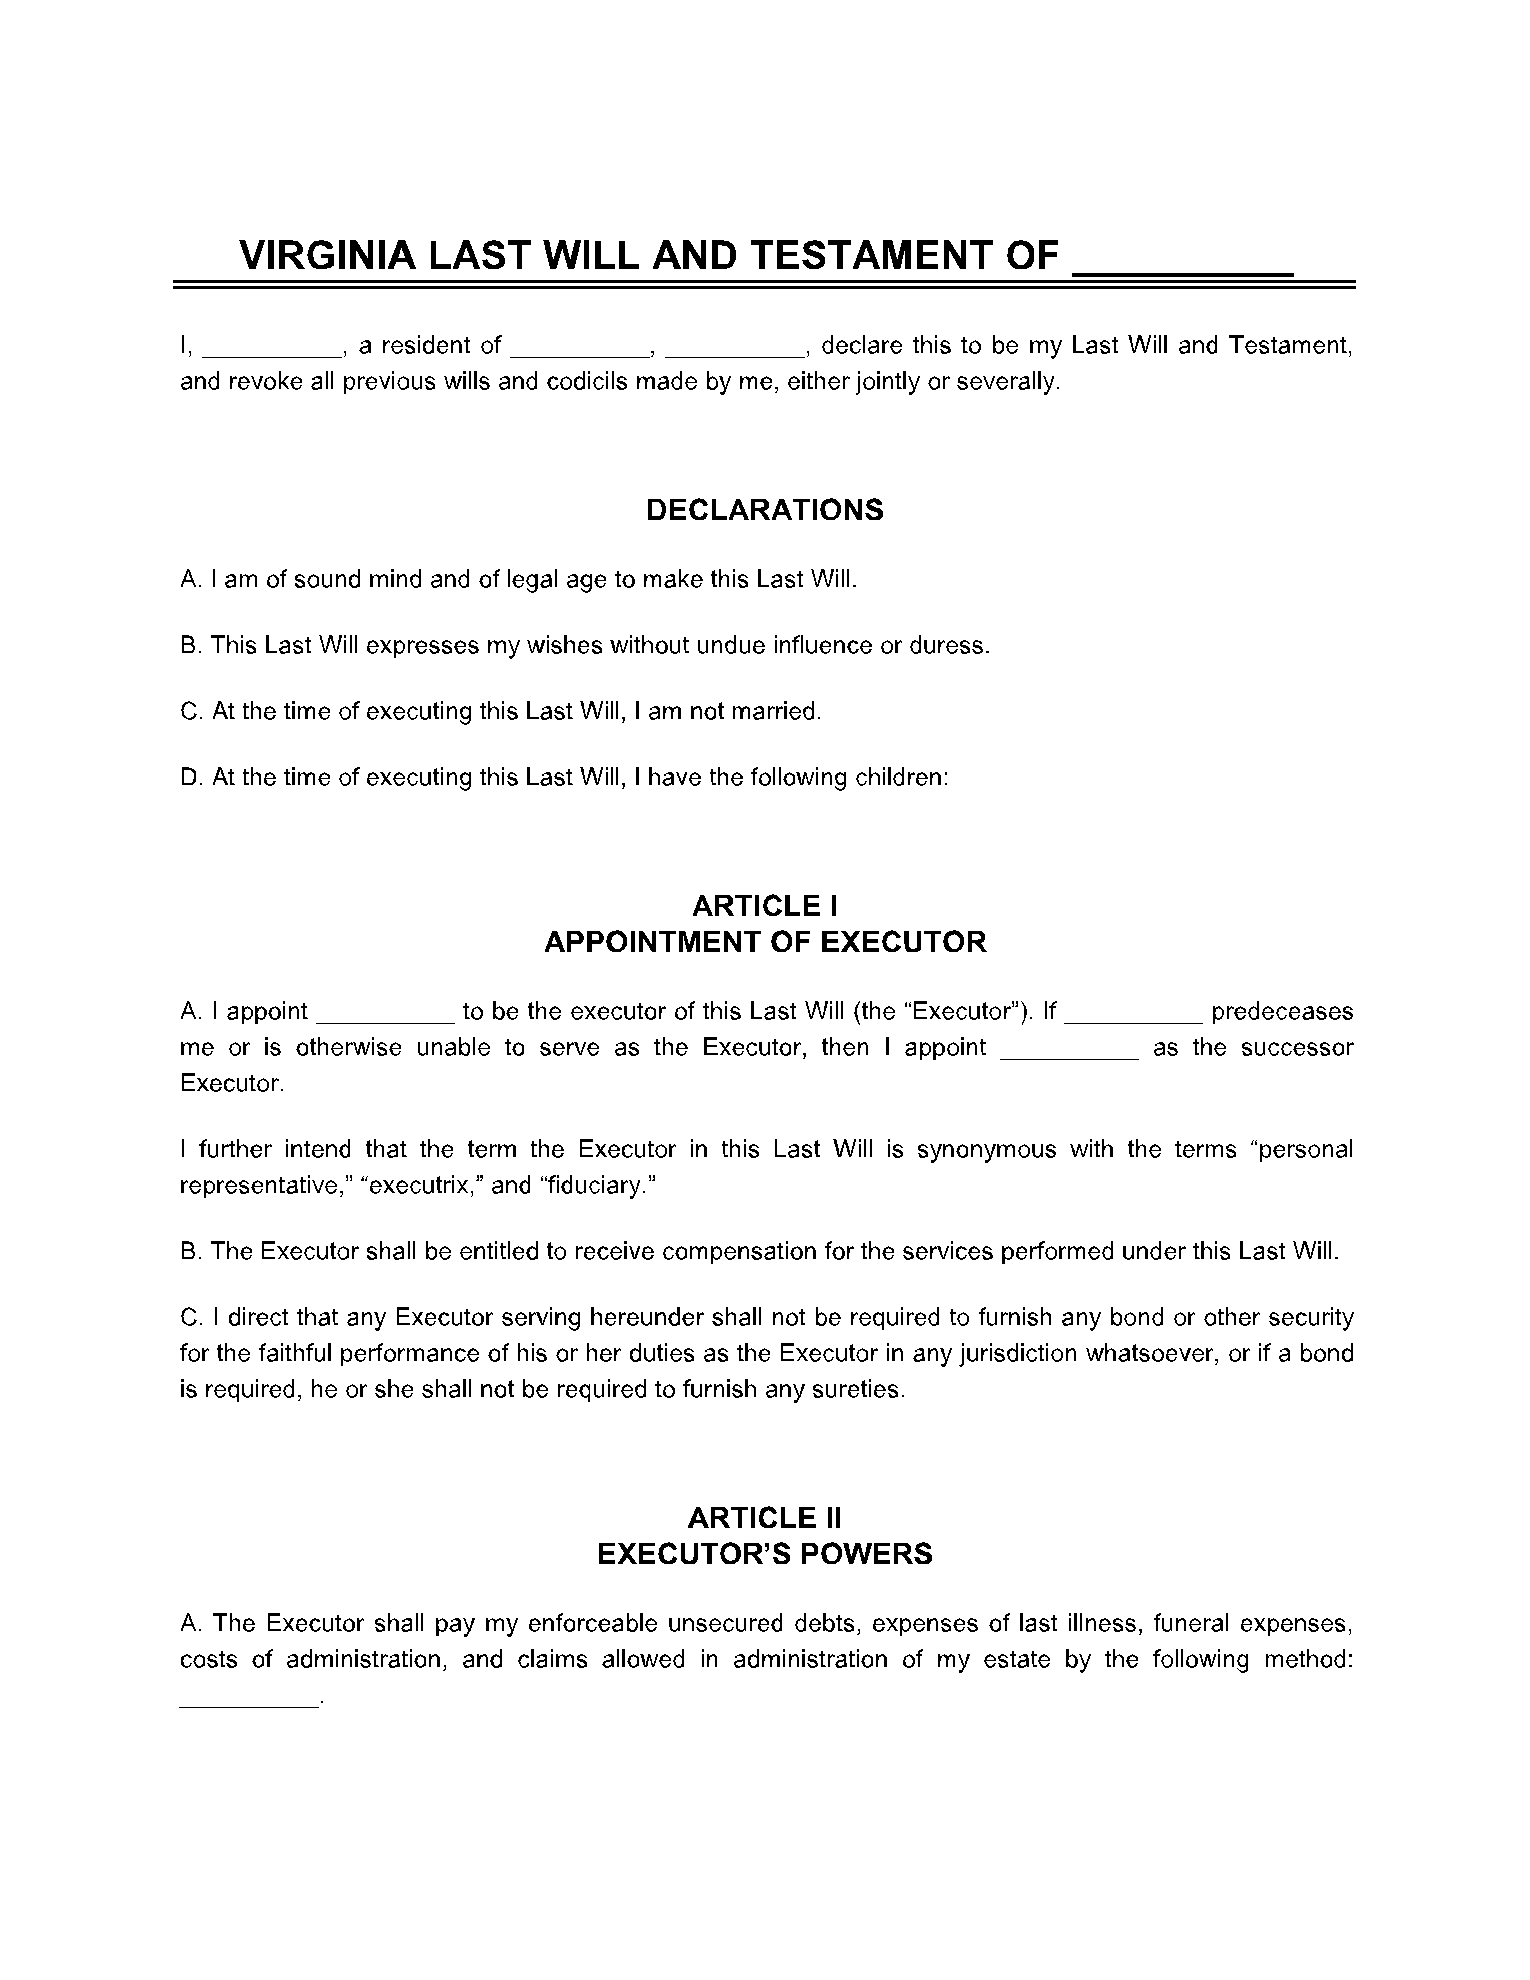 Last Will and Testament Template Virginia 1